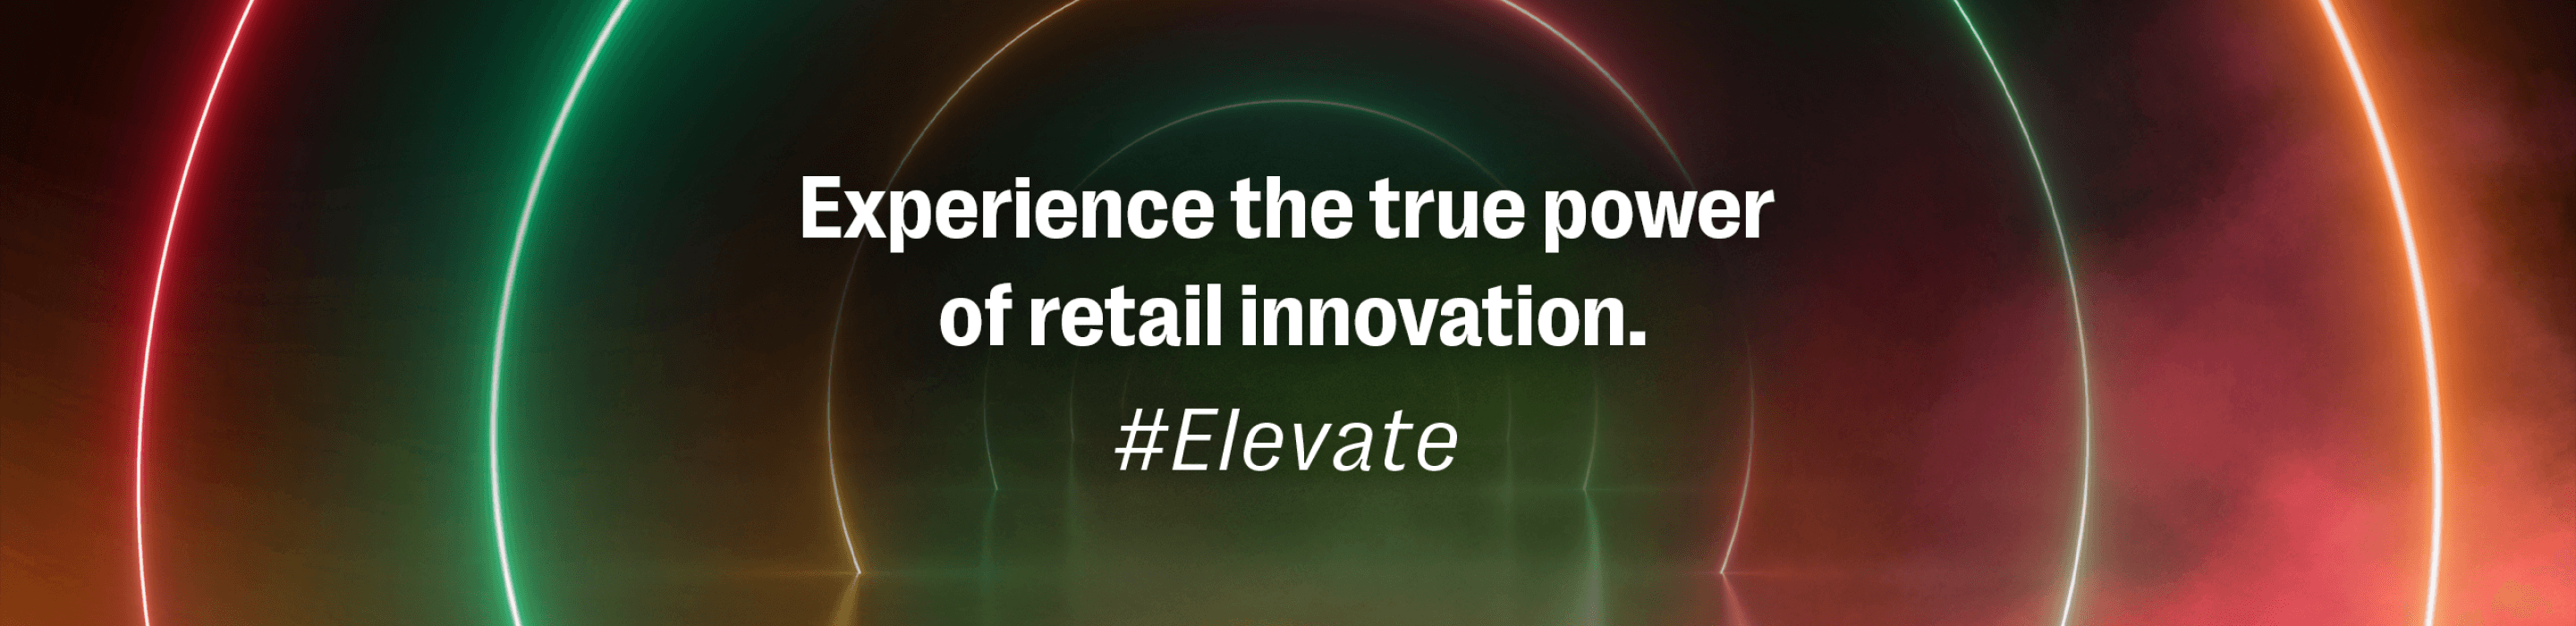 Culture of retail innovation